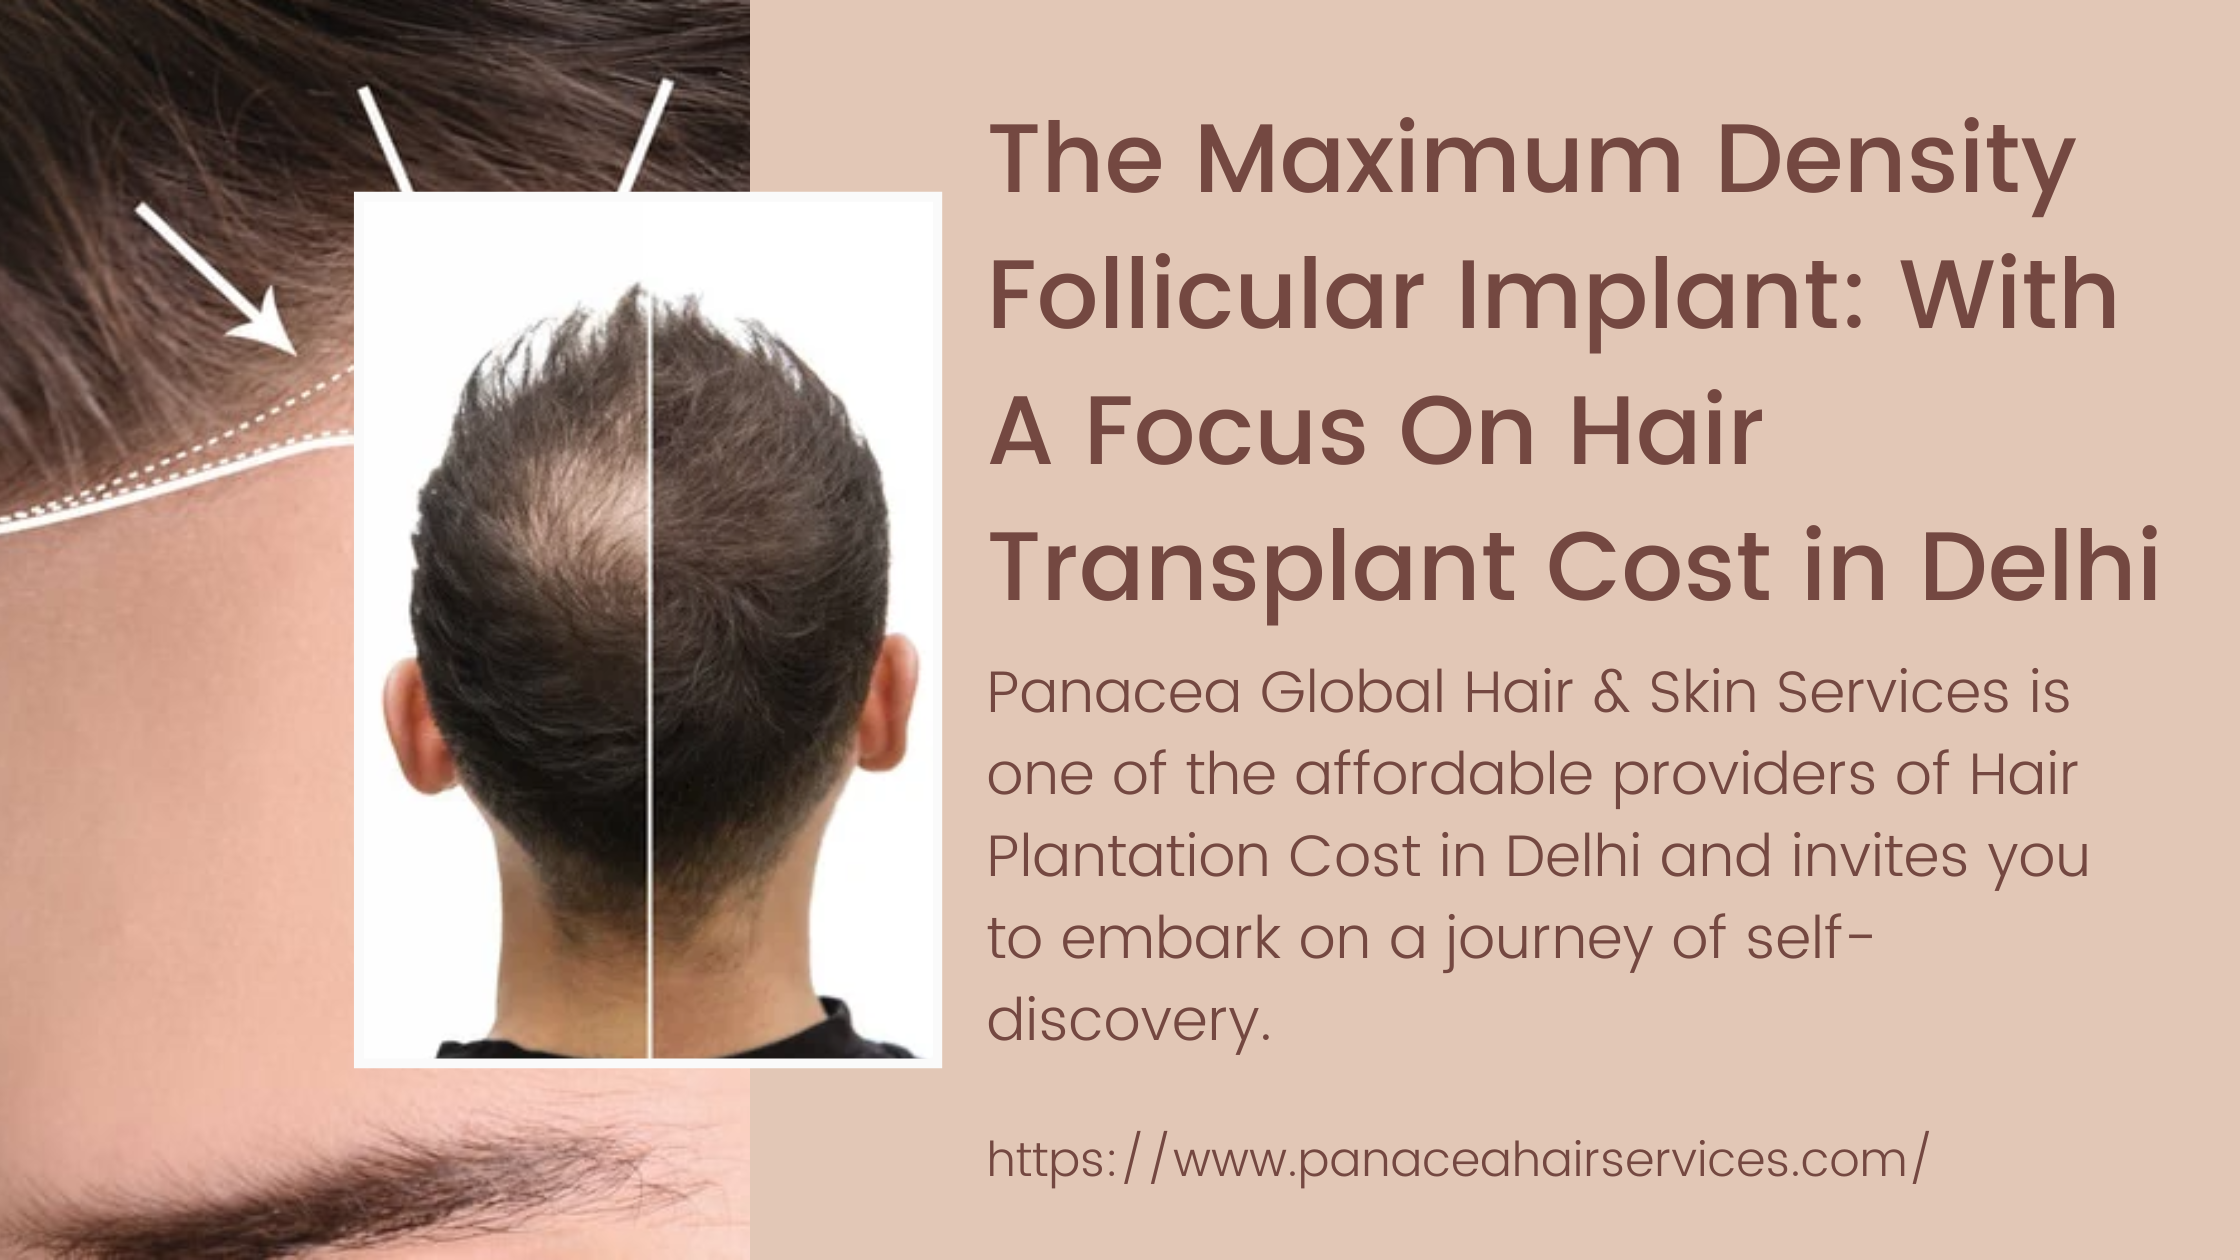 Learn About Delhis Elite Hair Secret:The Maximum Density Follicular Implant: With A Focus On Hair Transplant Cost in Delhi